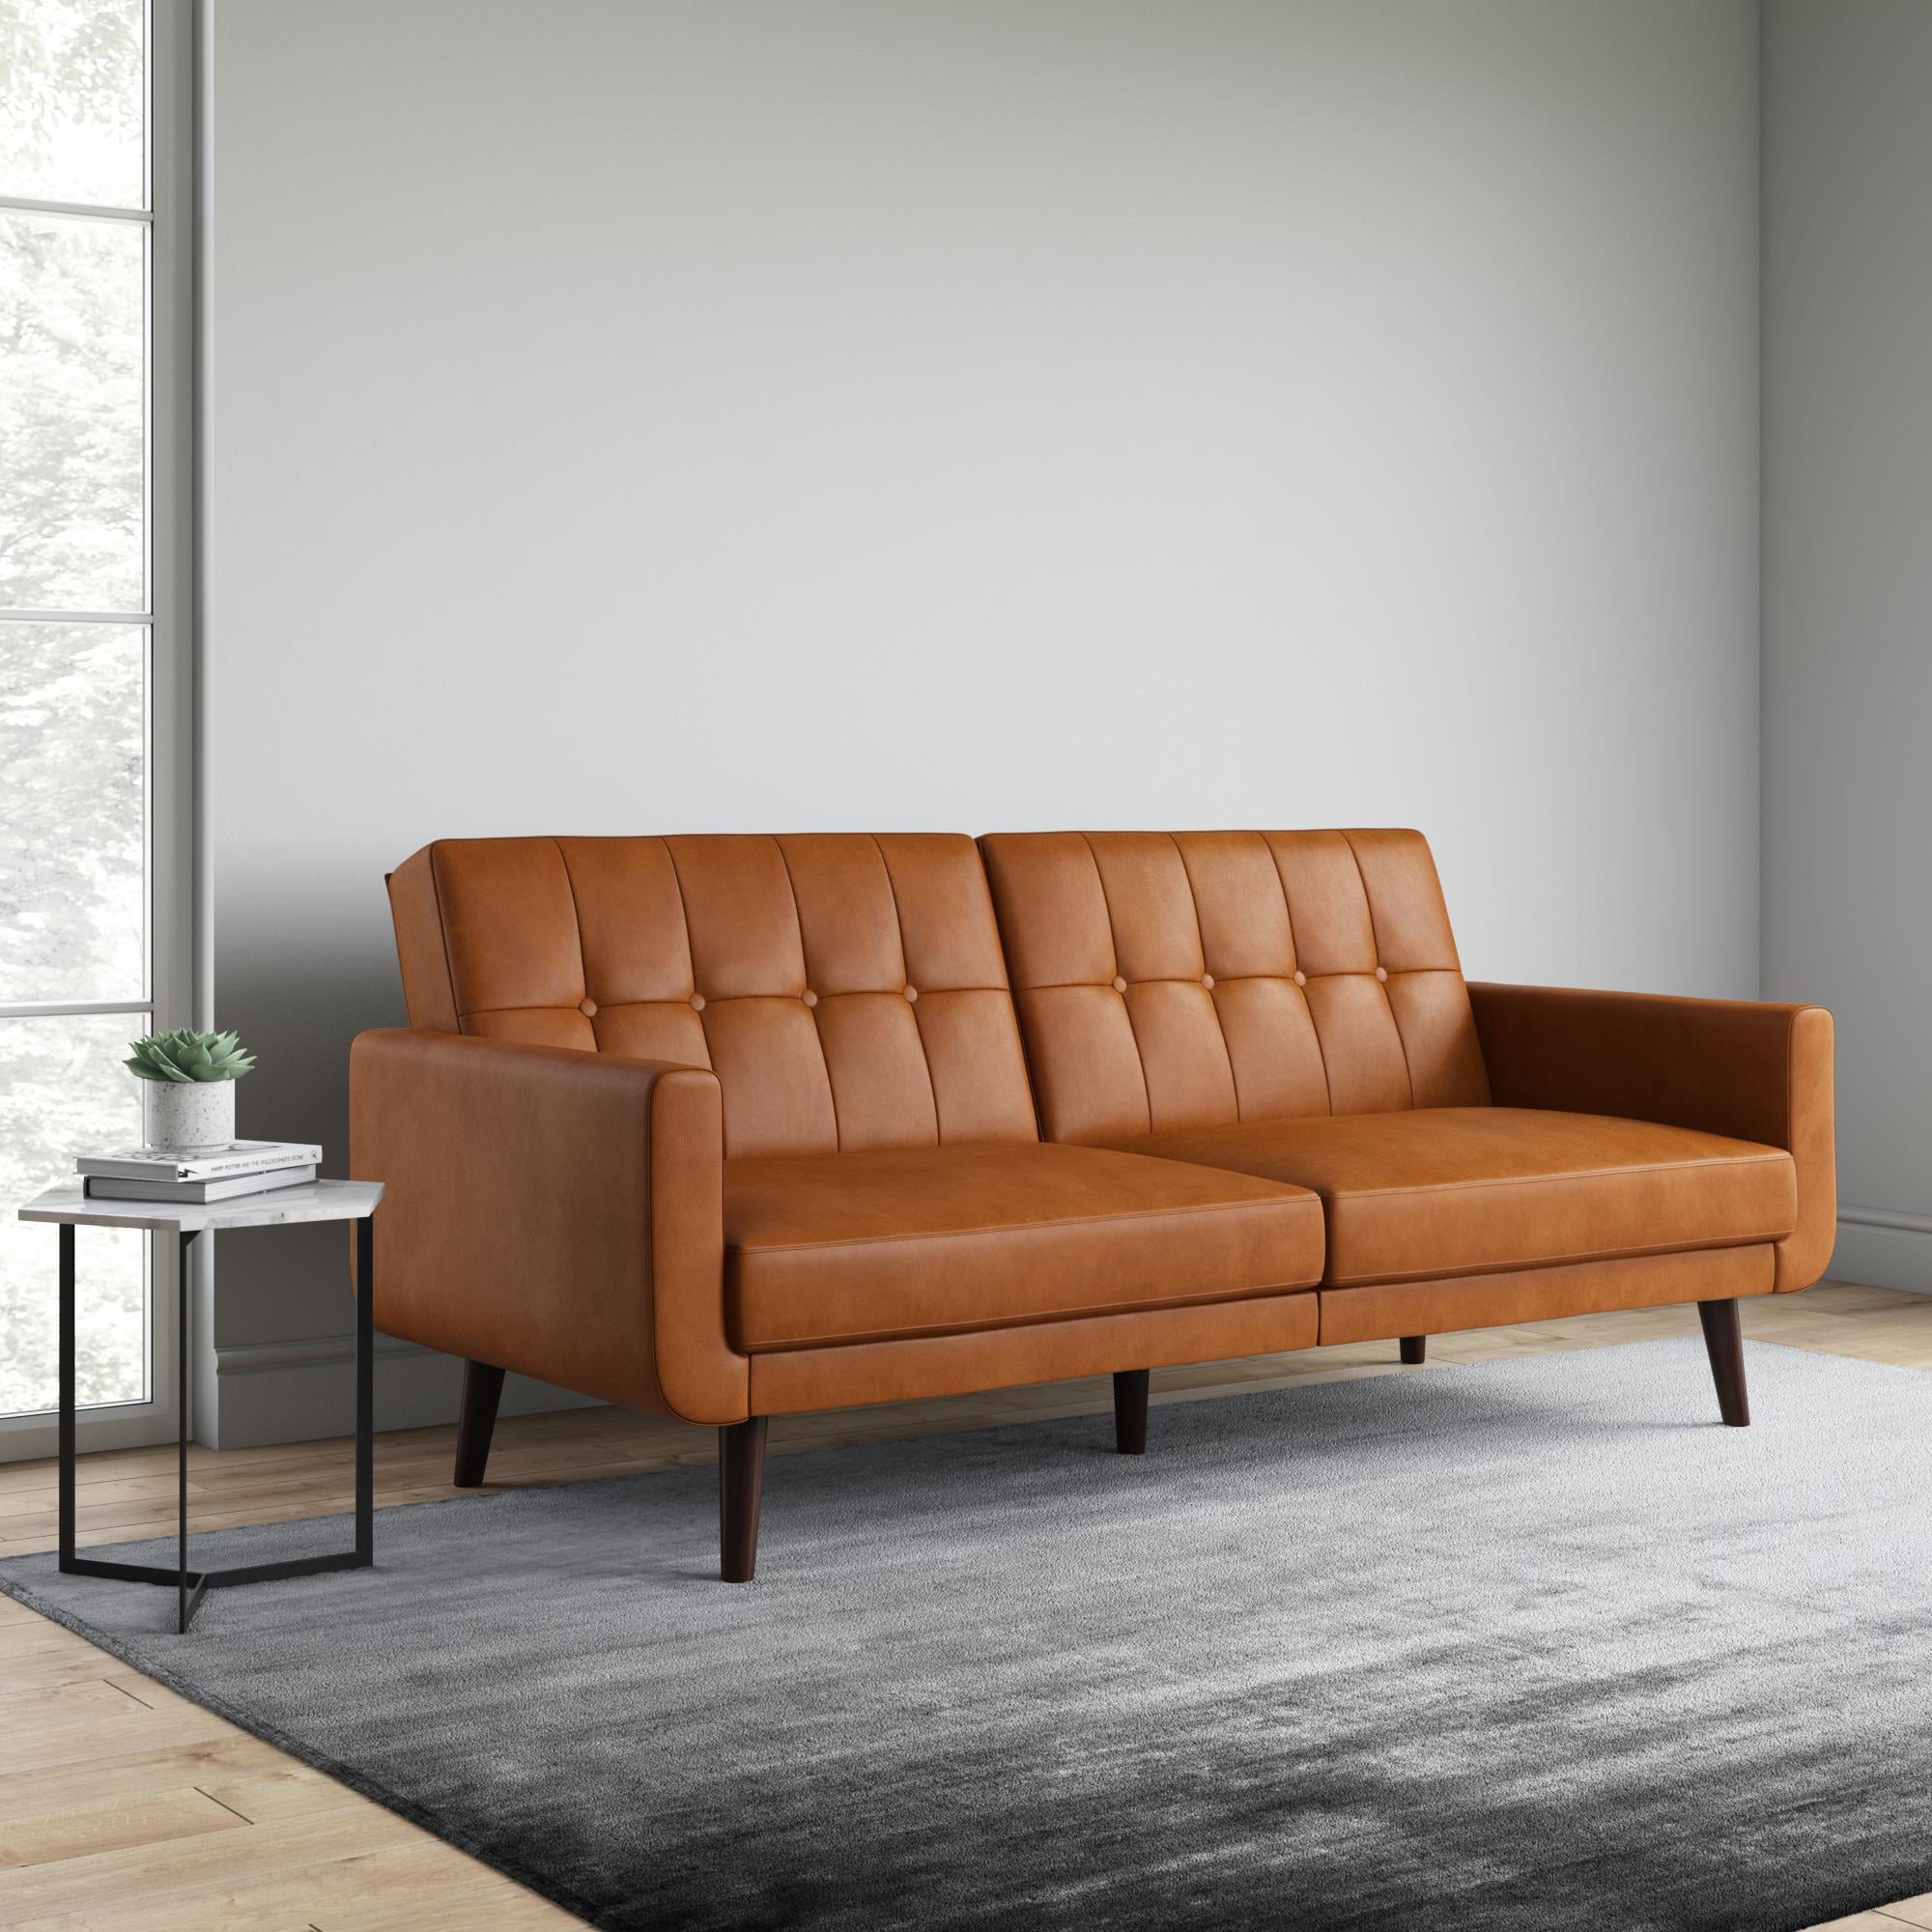 Better Homes Gardens Nola Modern, Camel Colored Leather Sofas